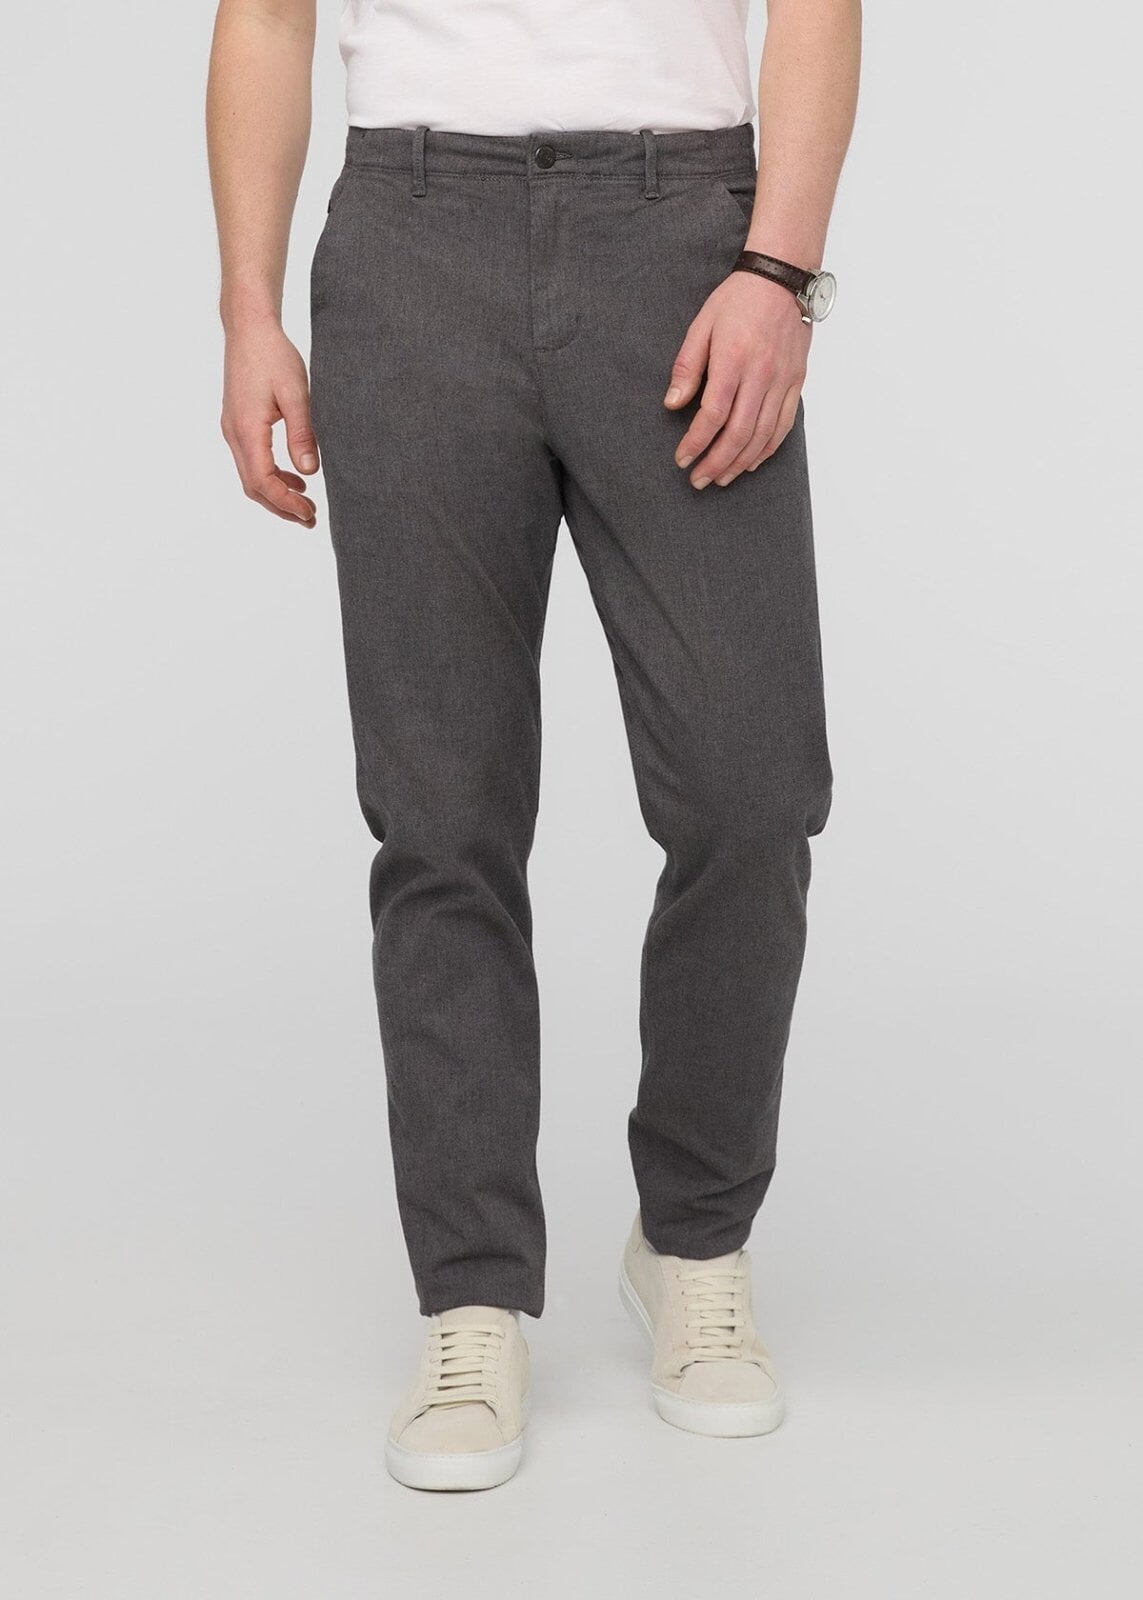 mens stretch heather grey chino pants front